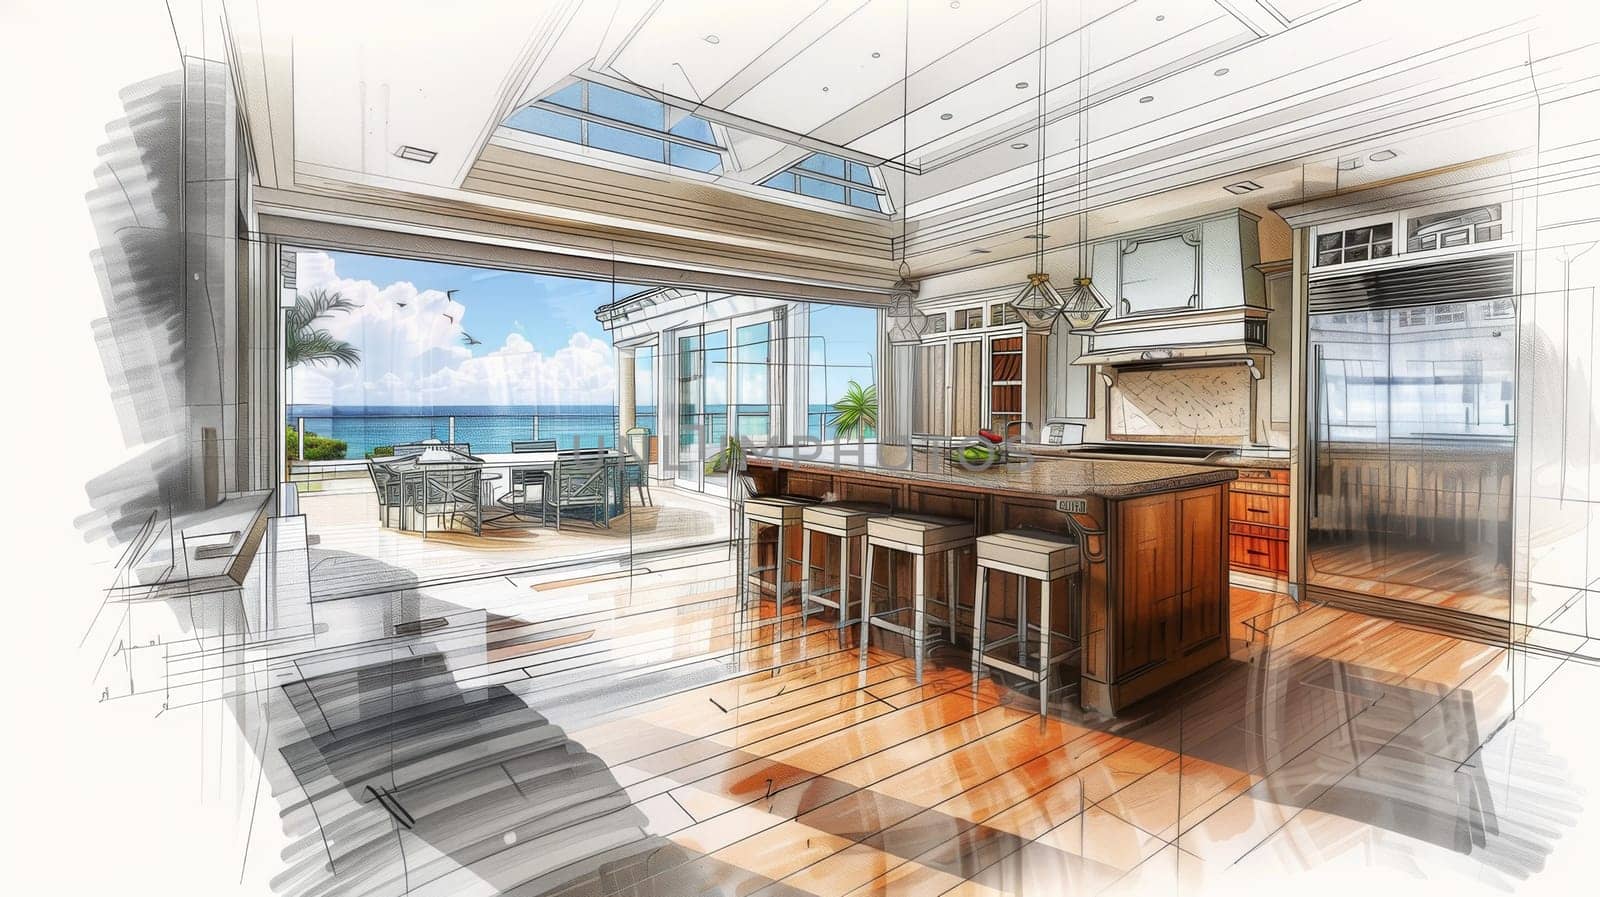 A hand-drawn illustration of a modern kitchen with large windows showcasing a breathtaking view of the ocean. The ocean waves can be seen crashing against the shore in the distance.